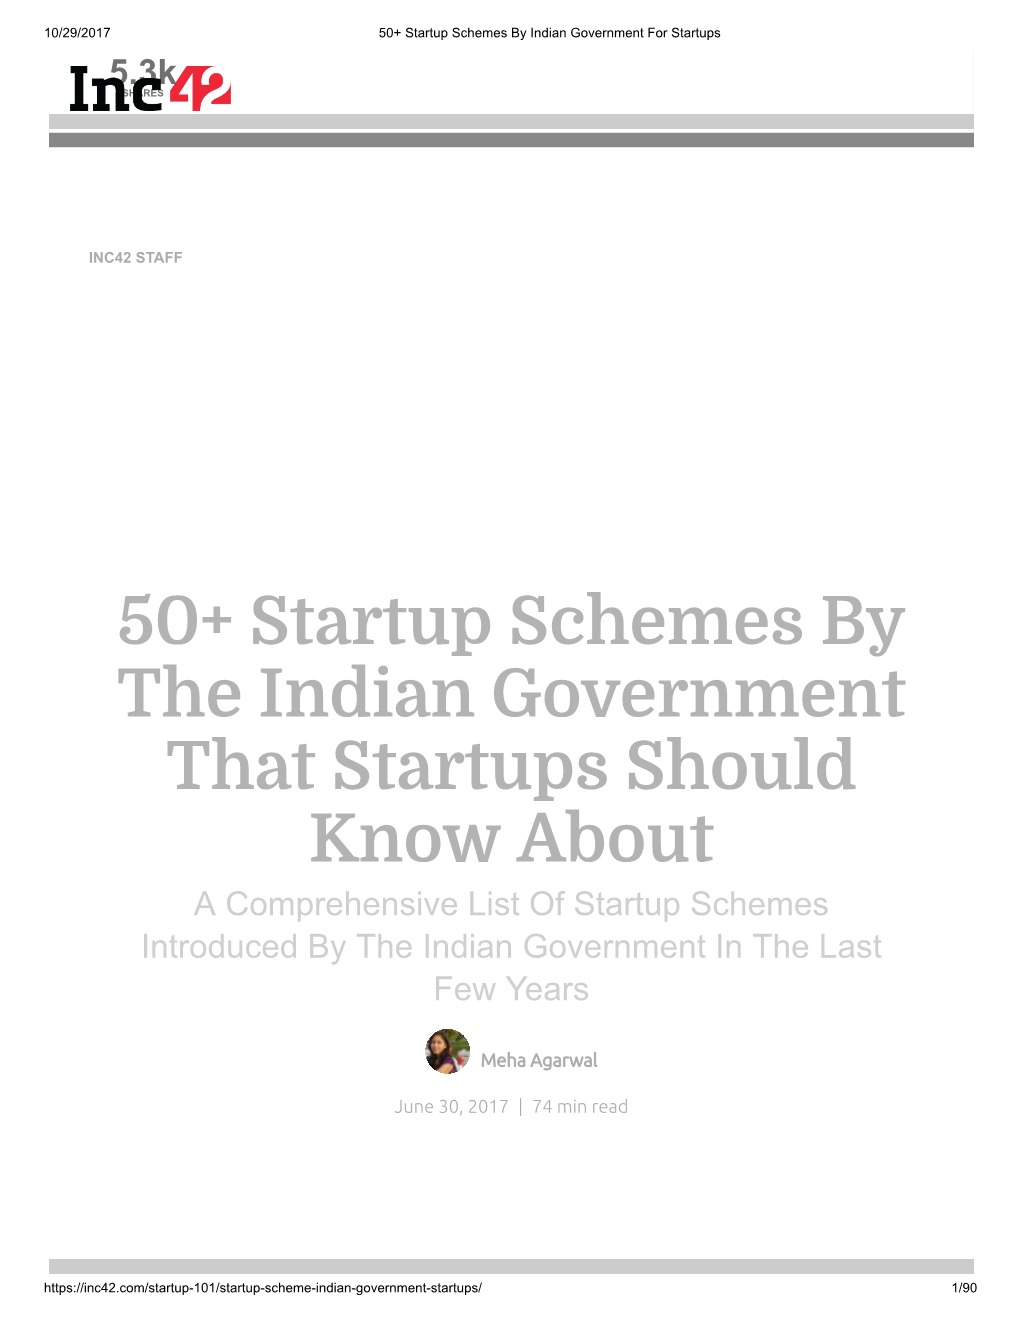 50+ Startup Schemes by the Indian Government That Startups Should Know About